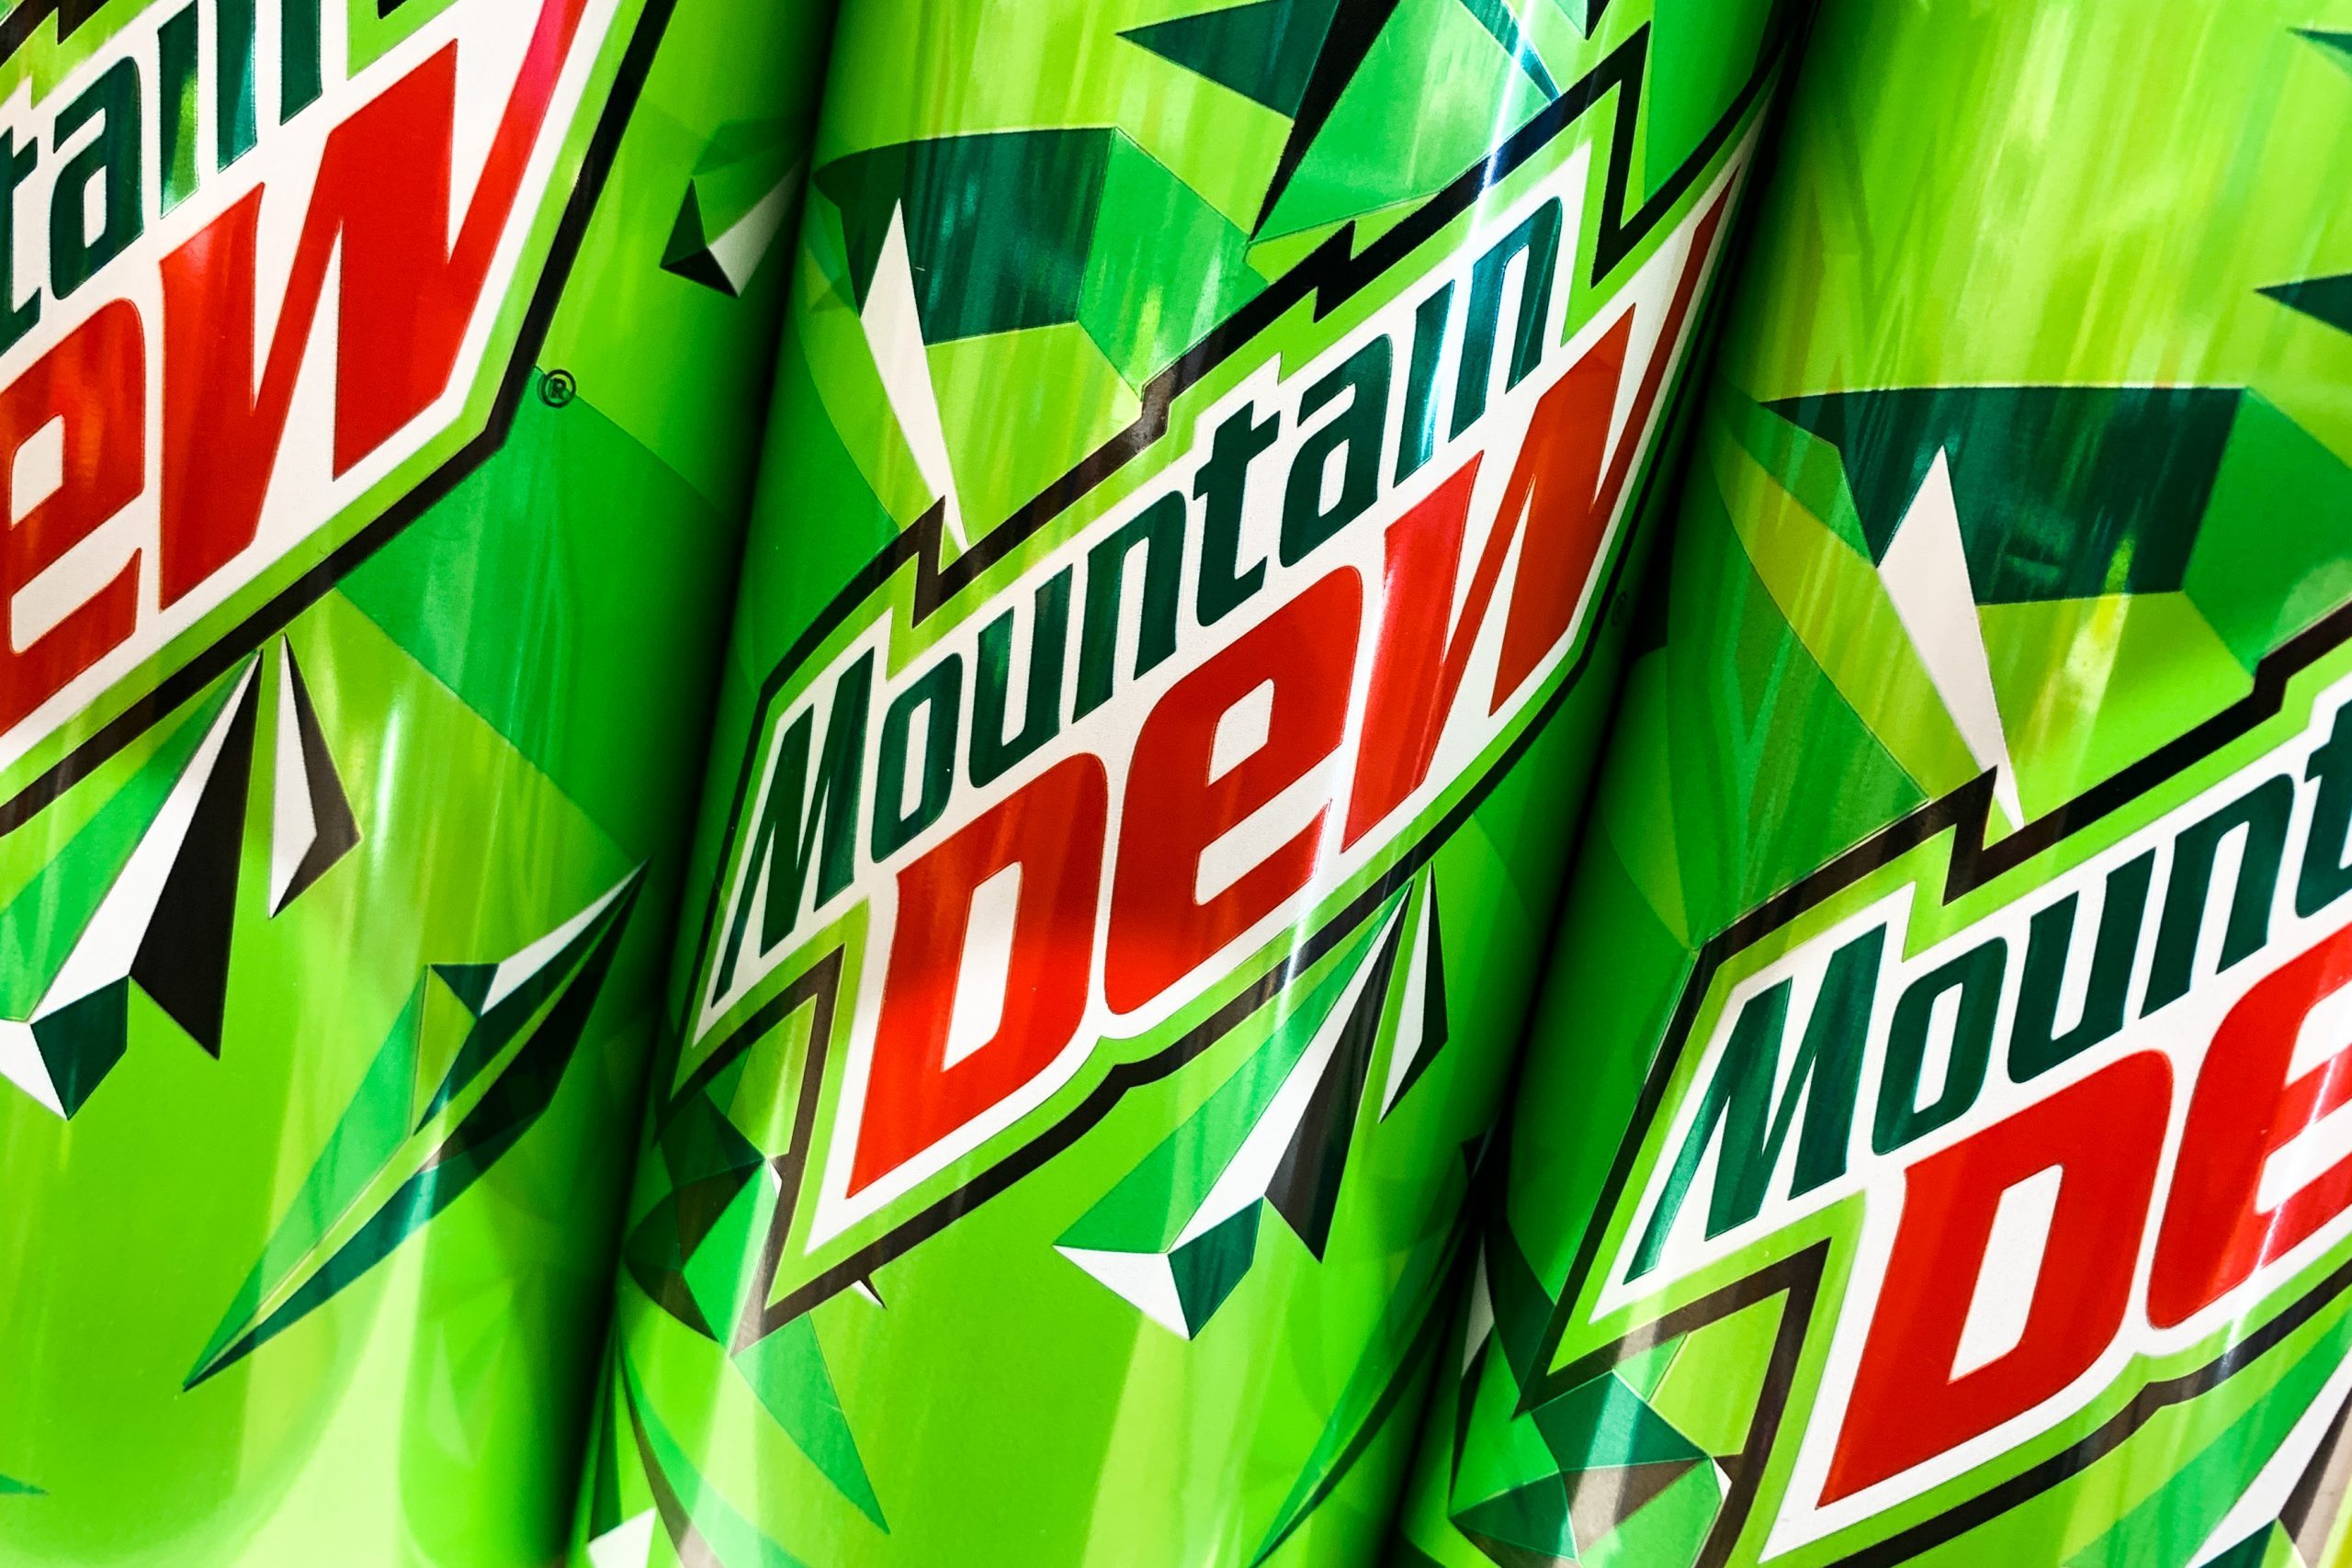 three mountain dew cans close up